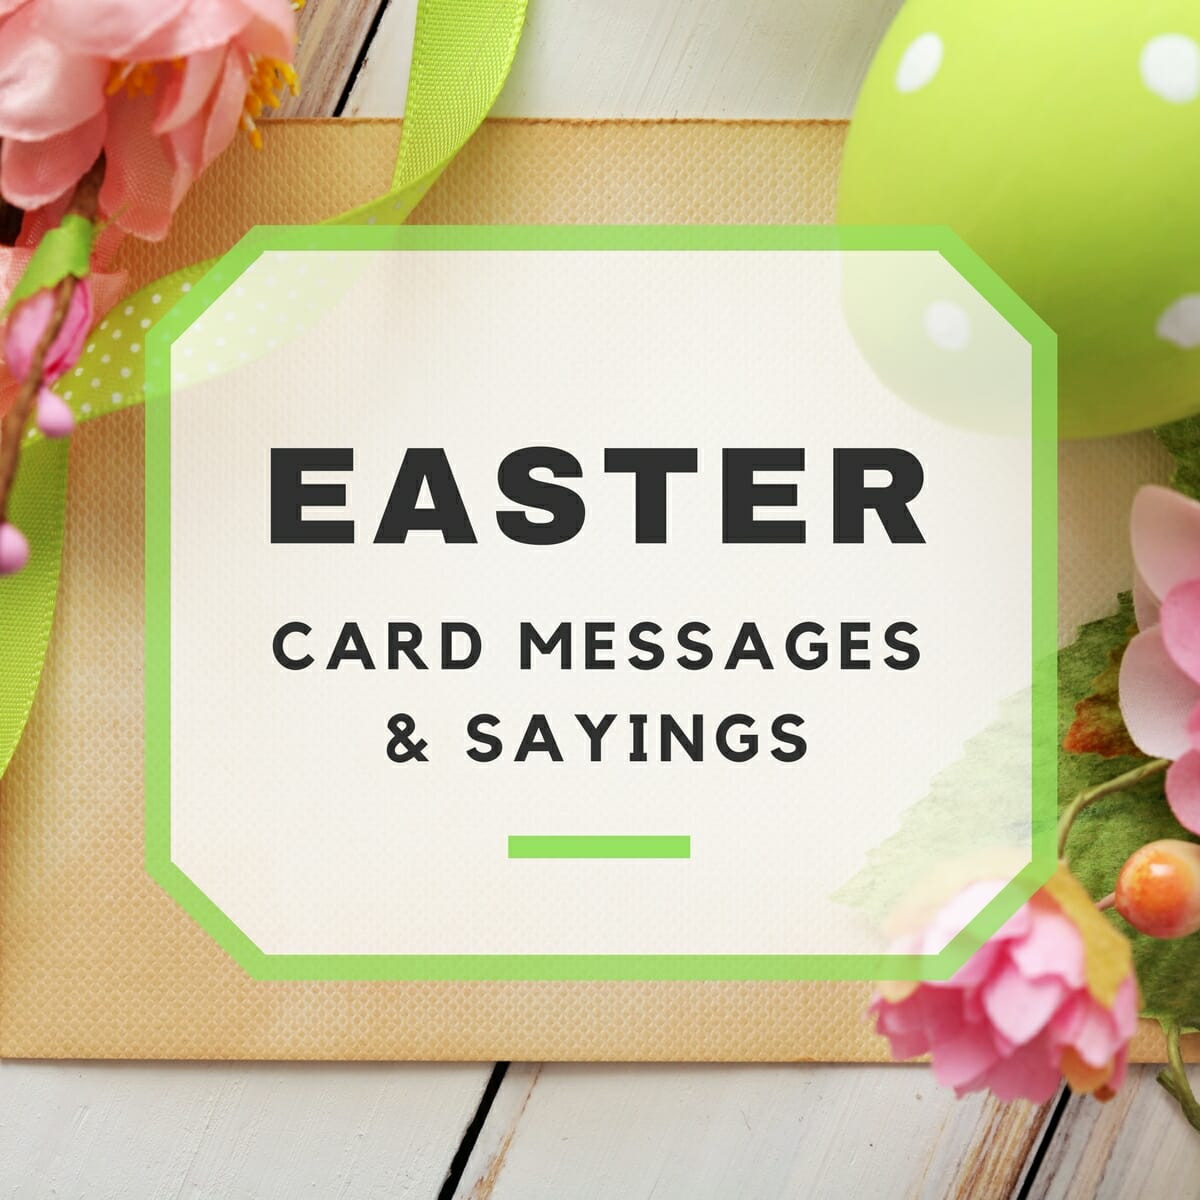 Quotes For Easter Wishes
 Gathered Again Family Reunions Events and Holidays